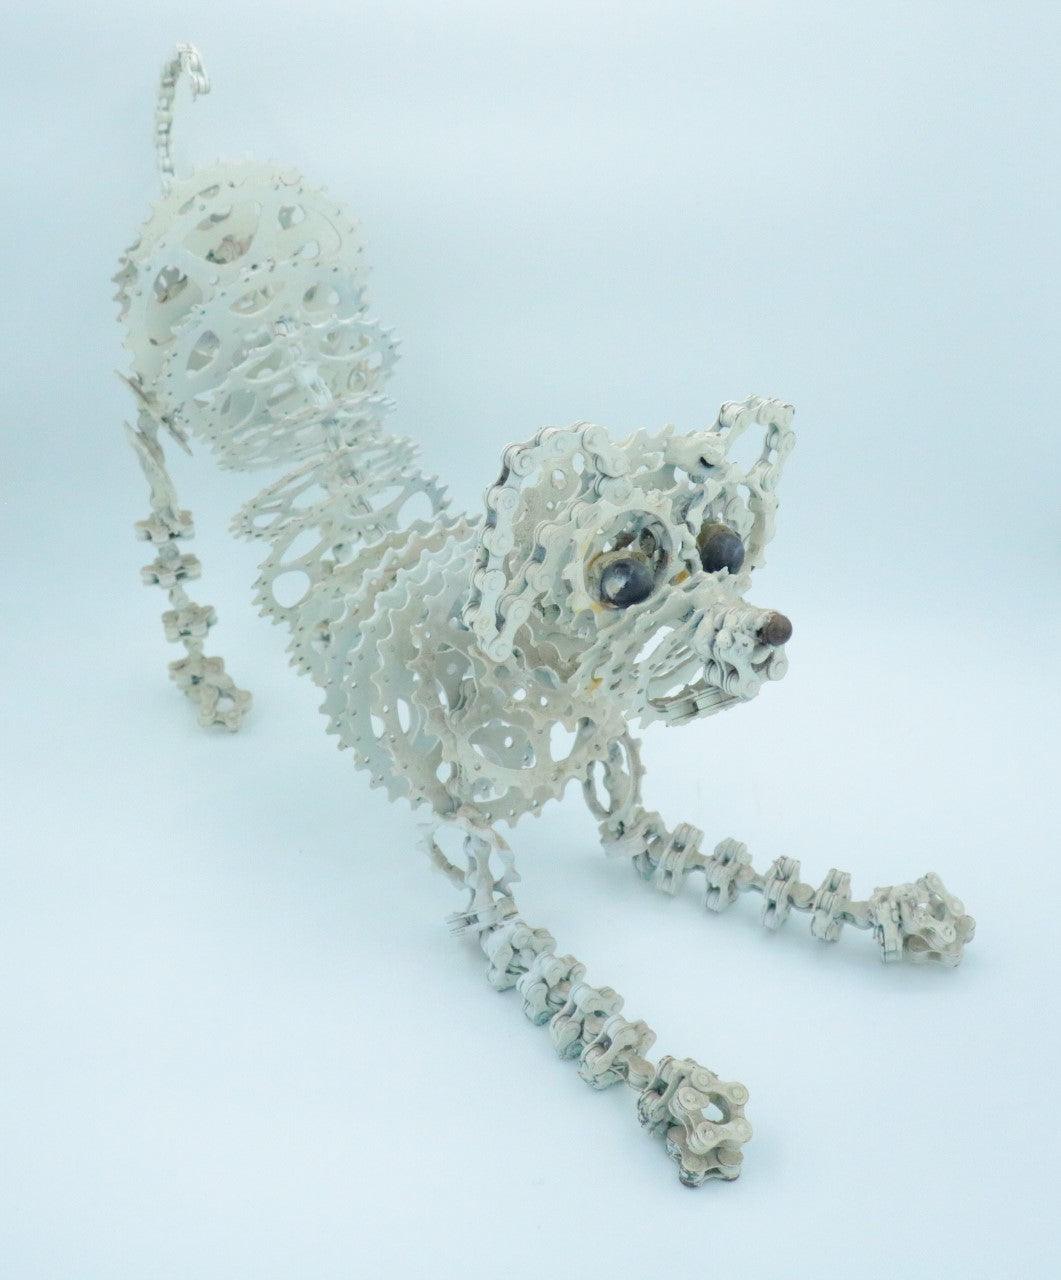 Dog Sculpture (Chika) | UNCHAINED by NIRIT LEVAV PACKER